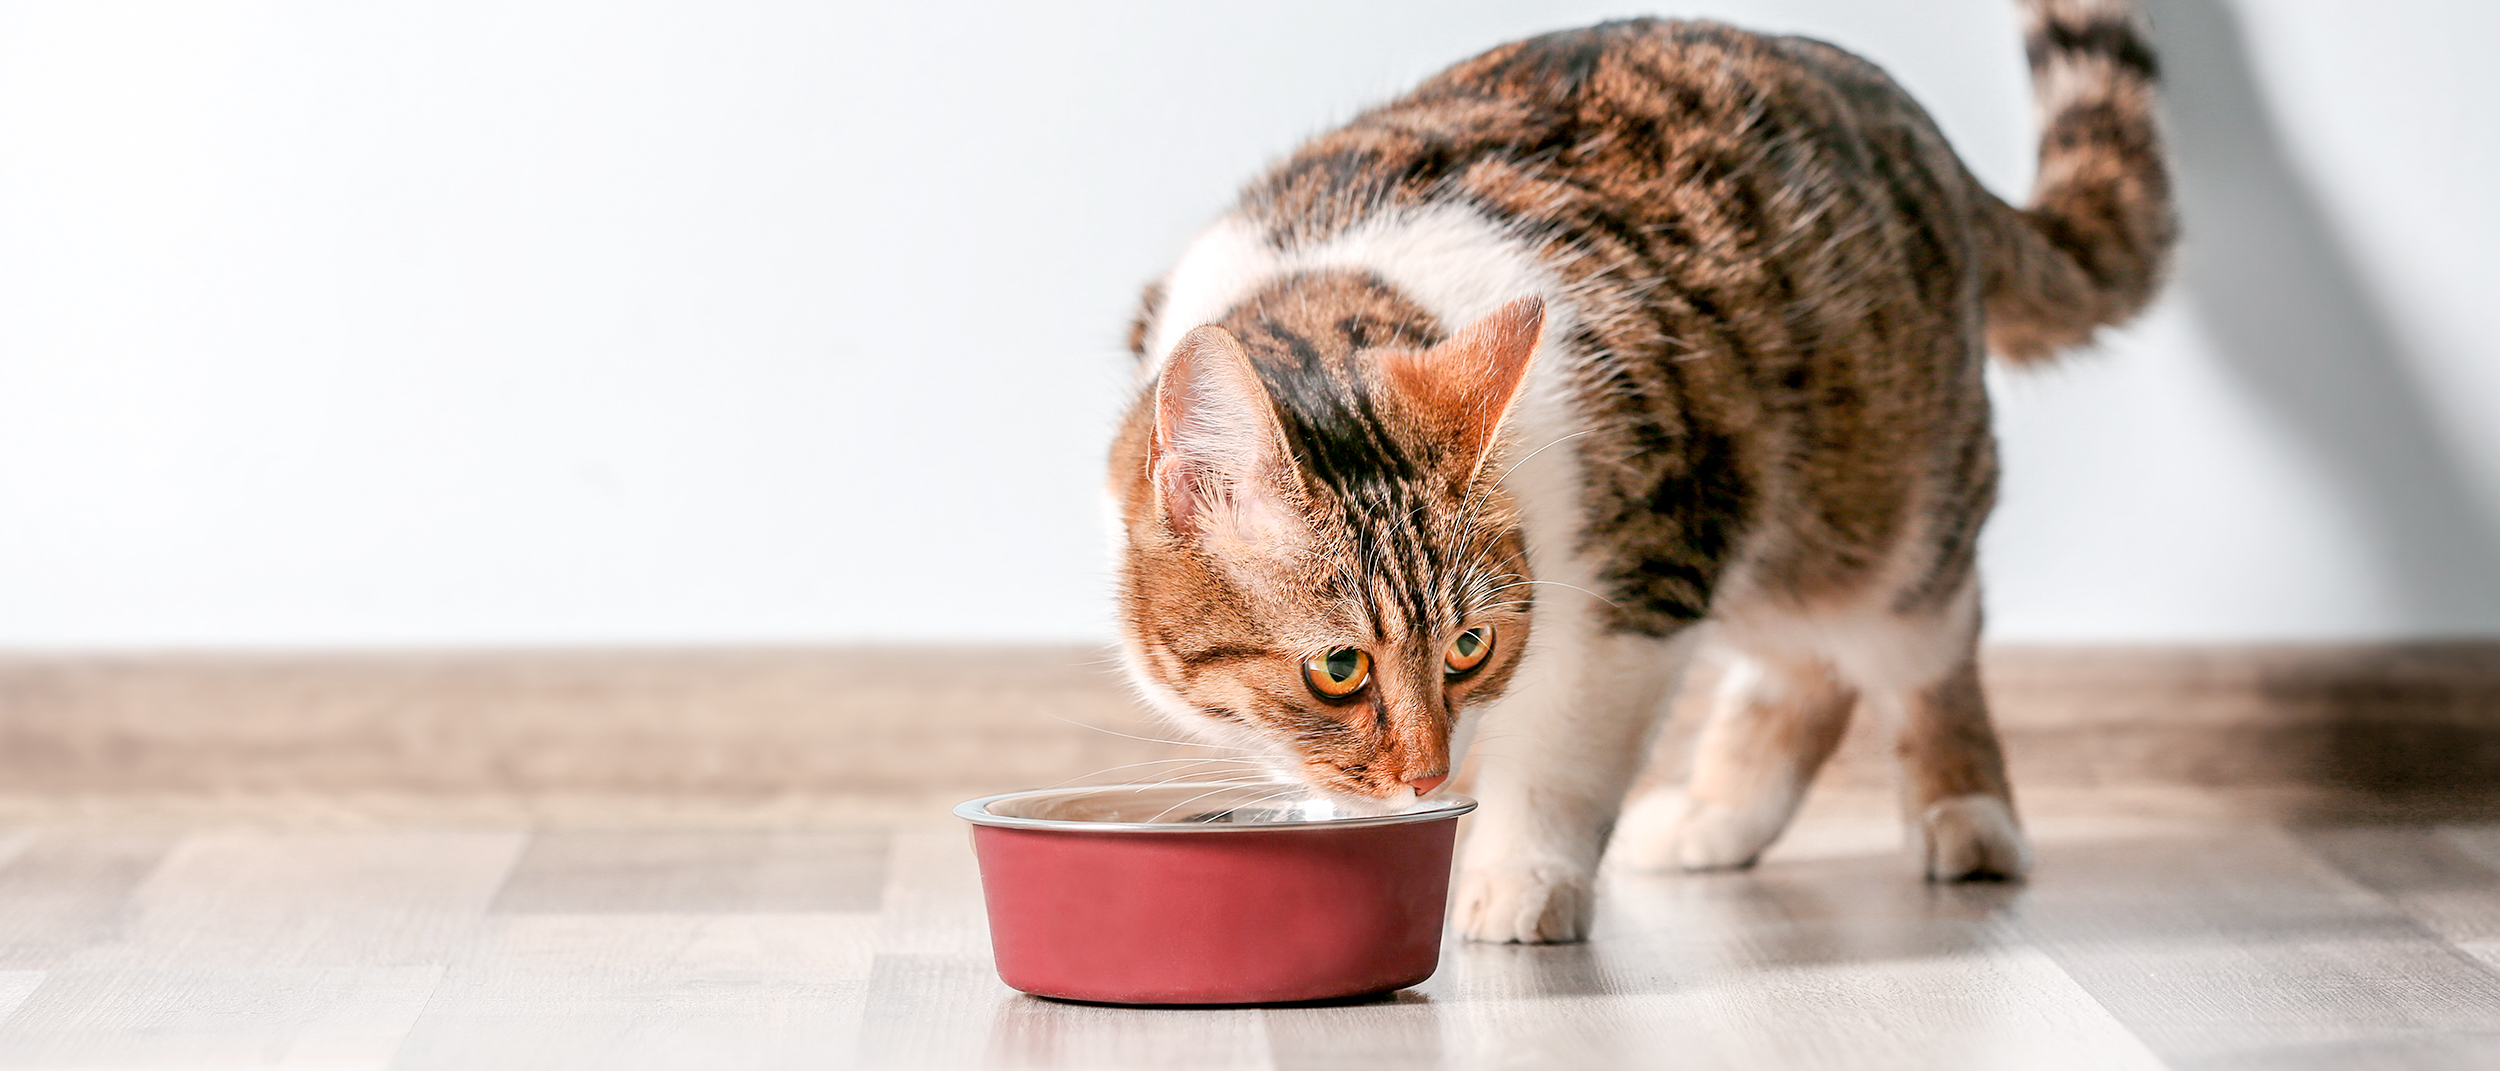 Aging cat standing indoors eating from a red bowl.